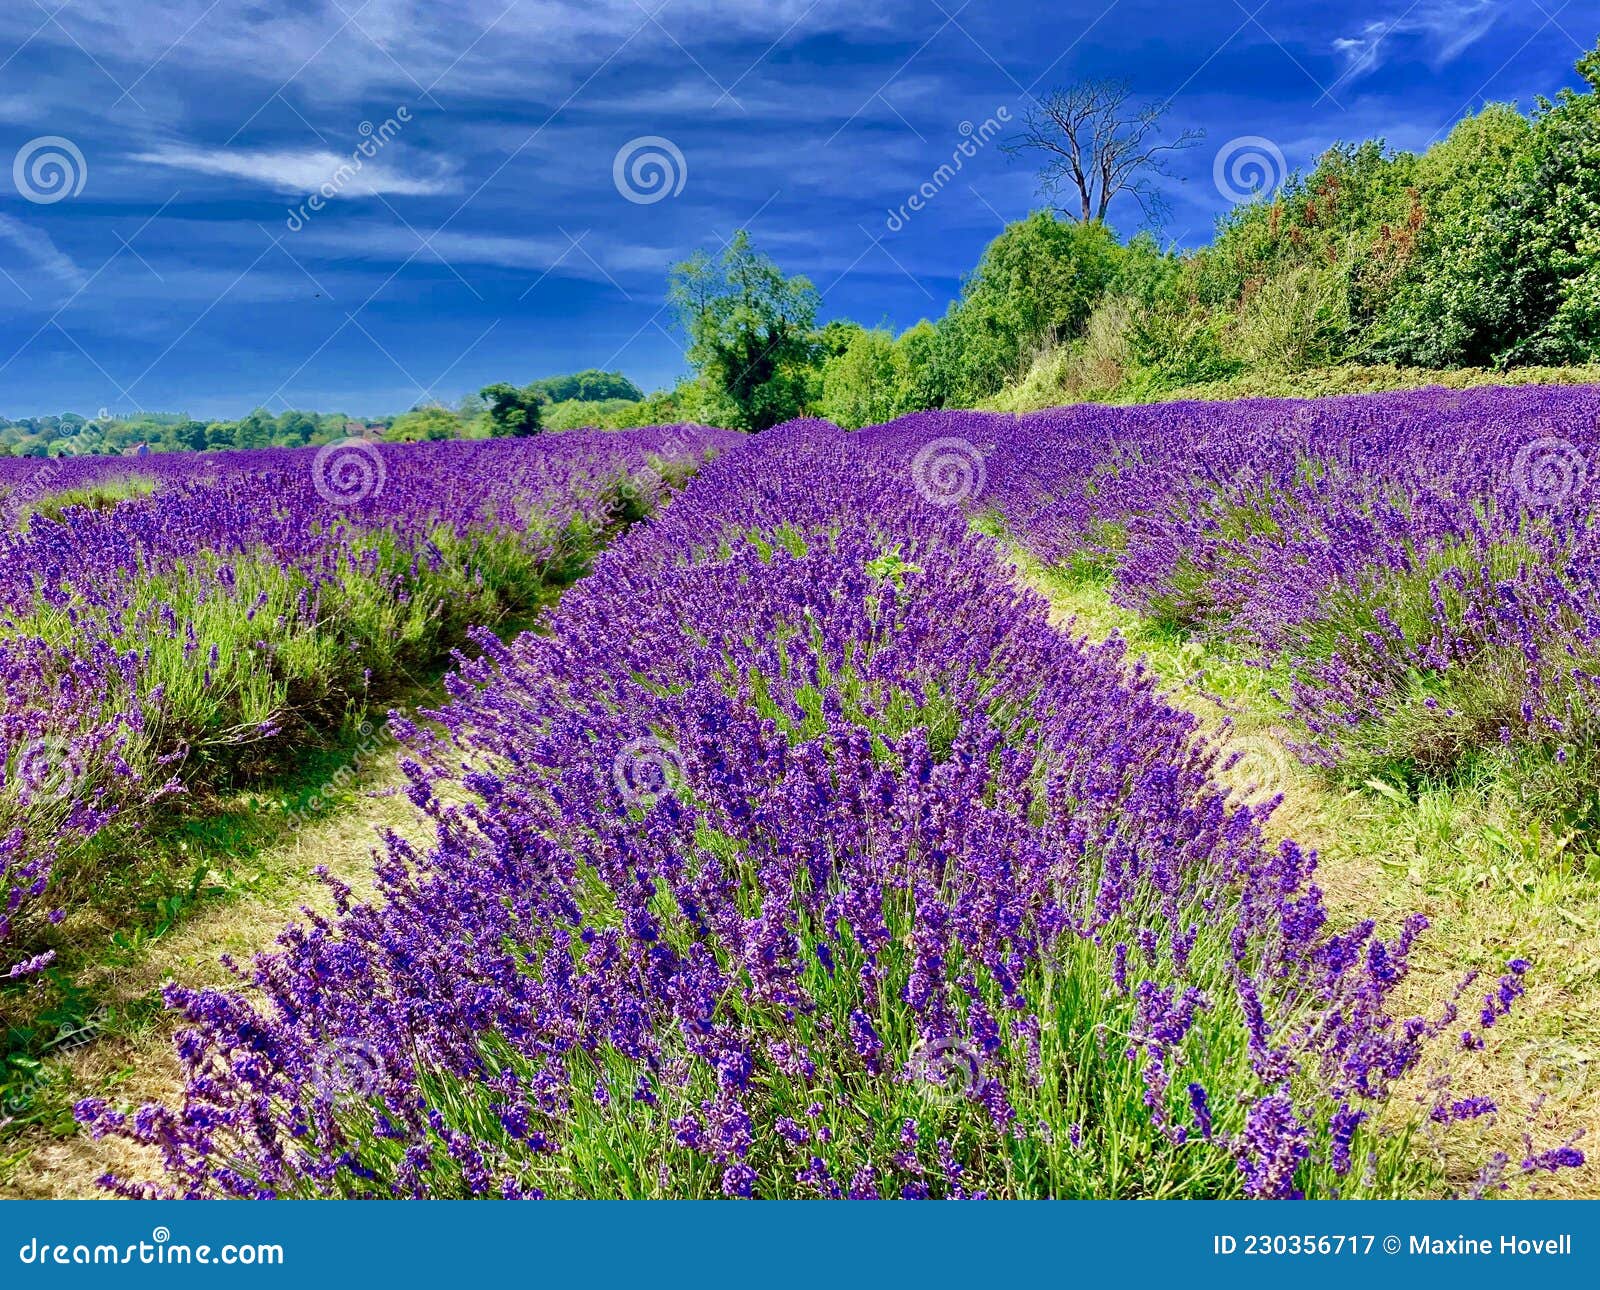 Lavender Field on a Hot Summers Day. Stock Image - Image of trees ...